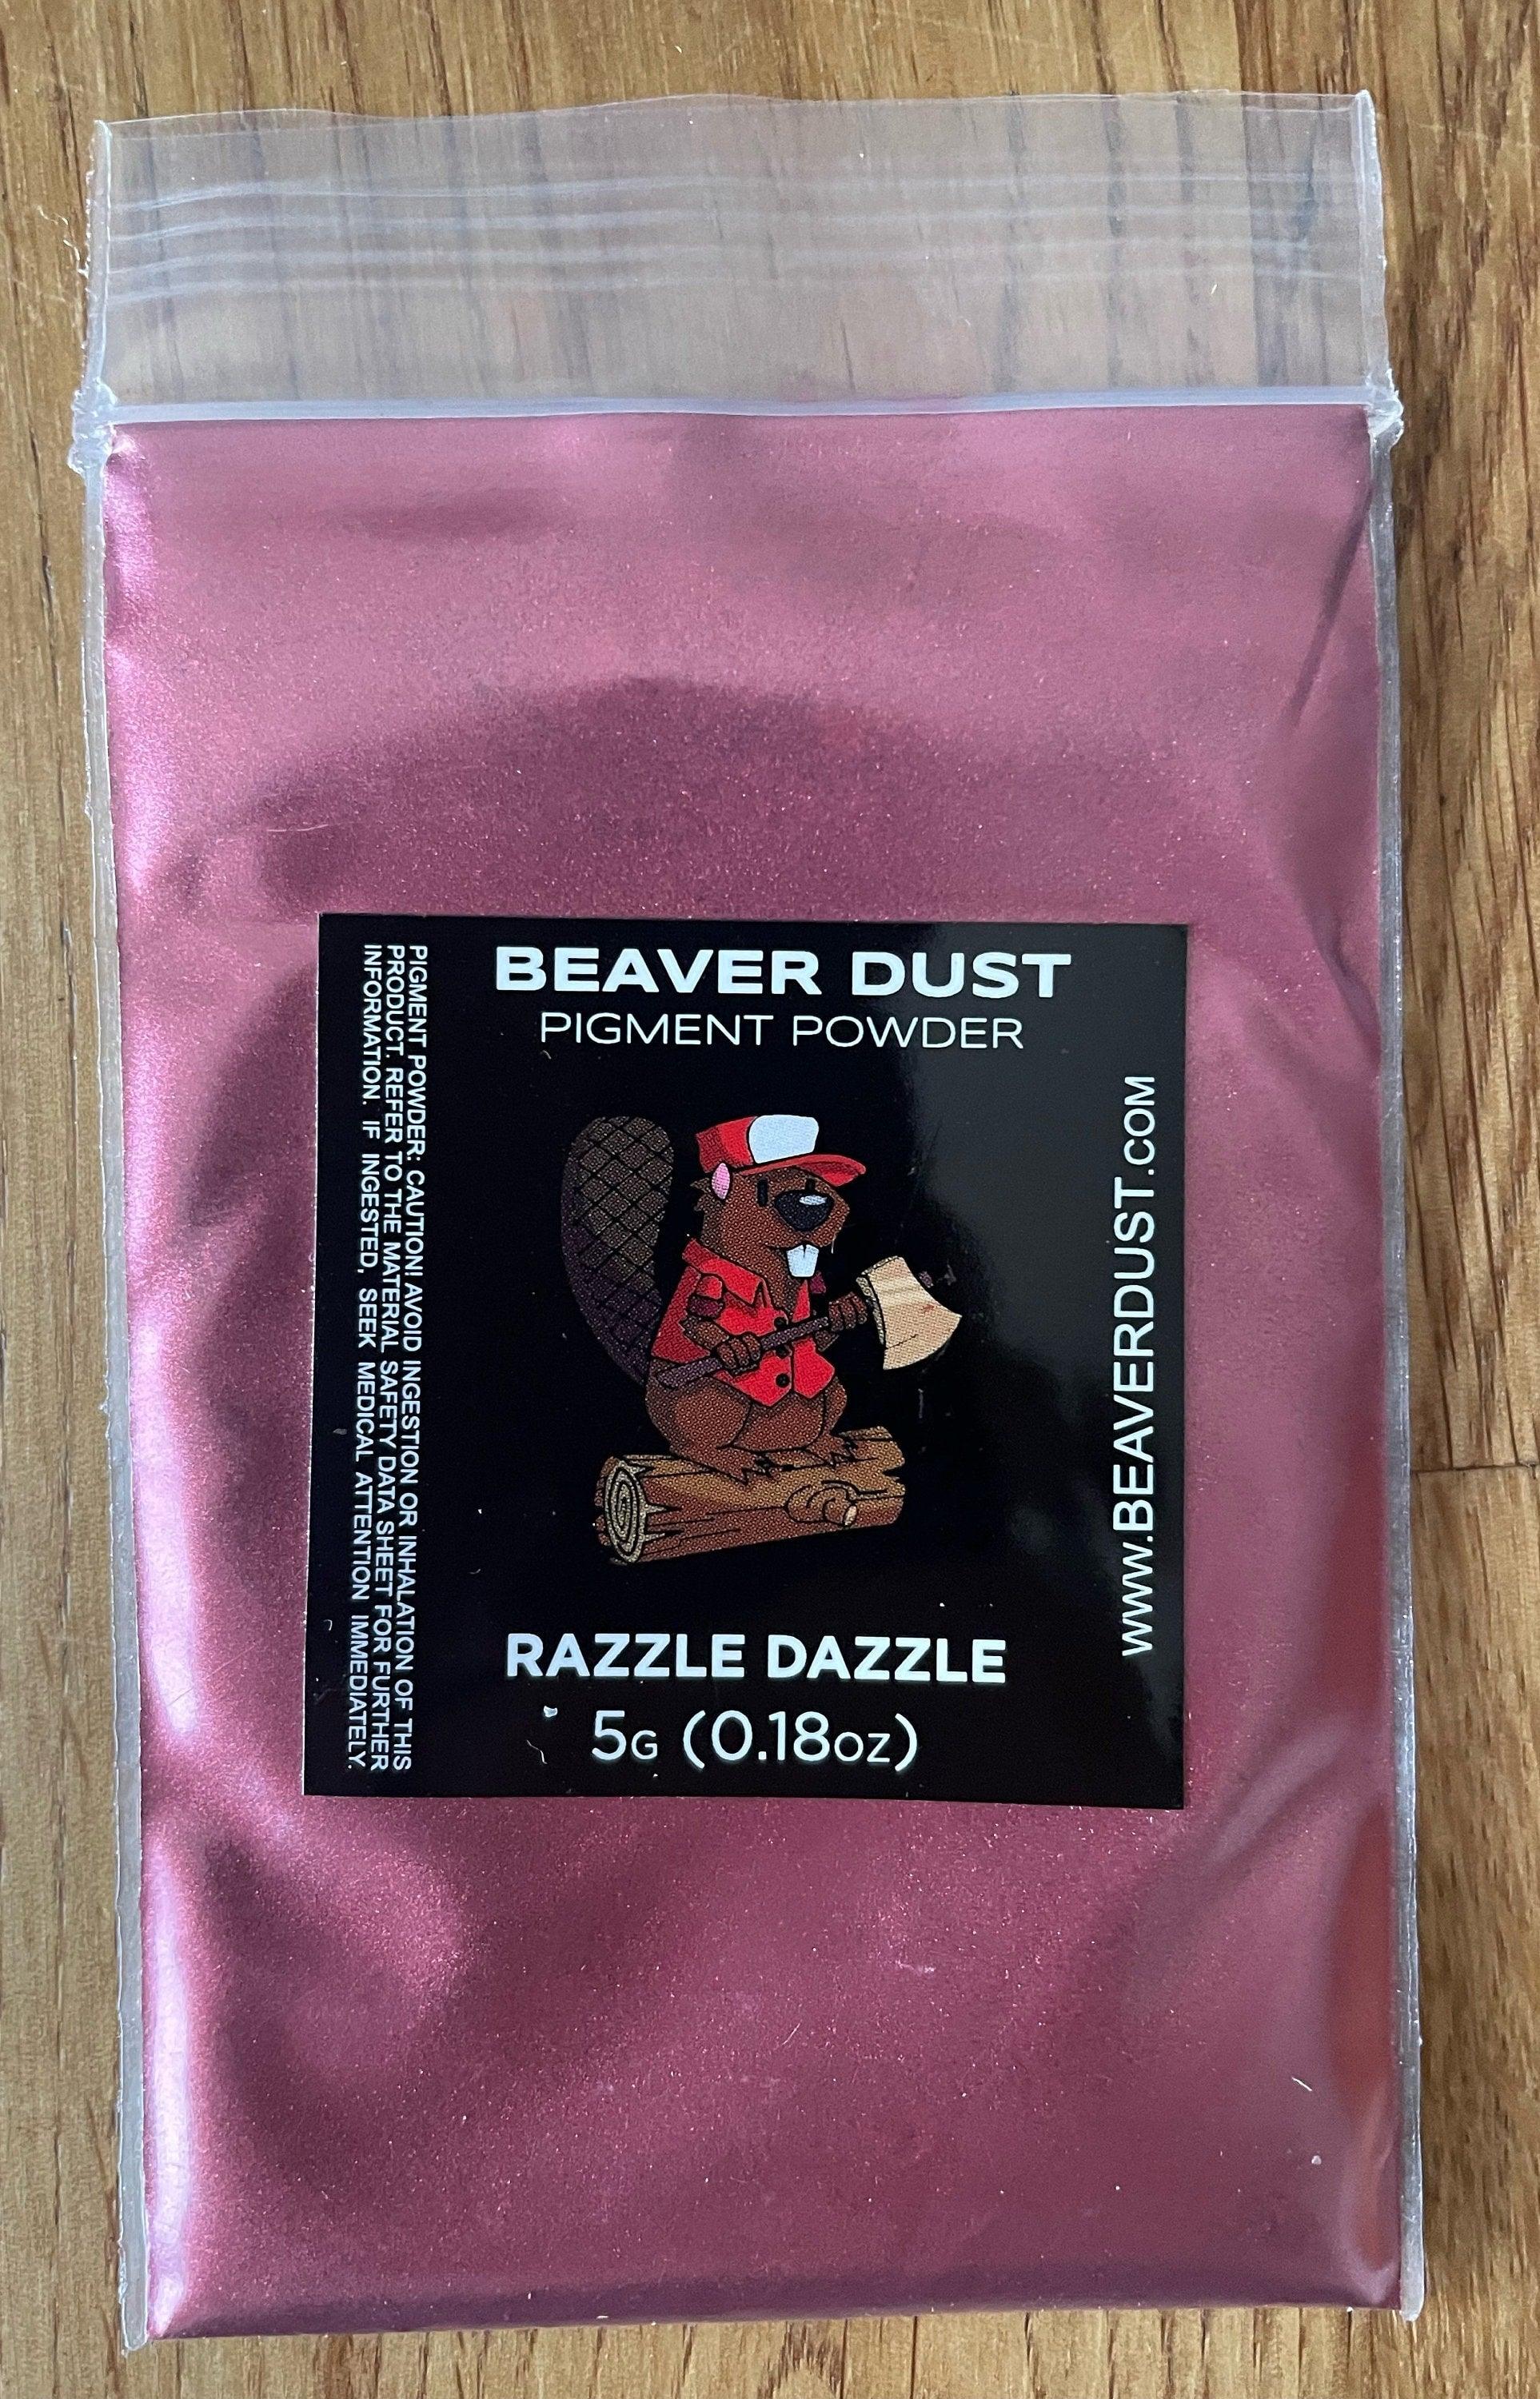 Mica Powder - Razzle Dazzle - Mica Powder For Epoxy Resin, Candle Making, Soap Making, Makeup, Nail Art and Much More - TMResinsupplies